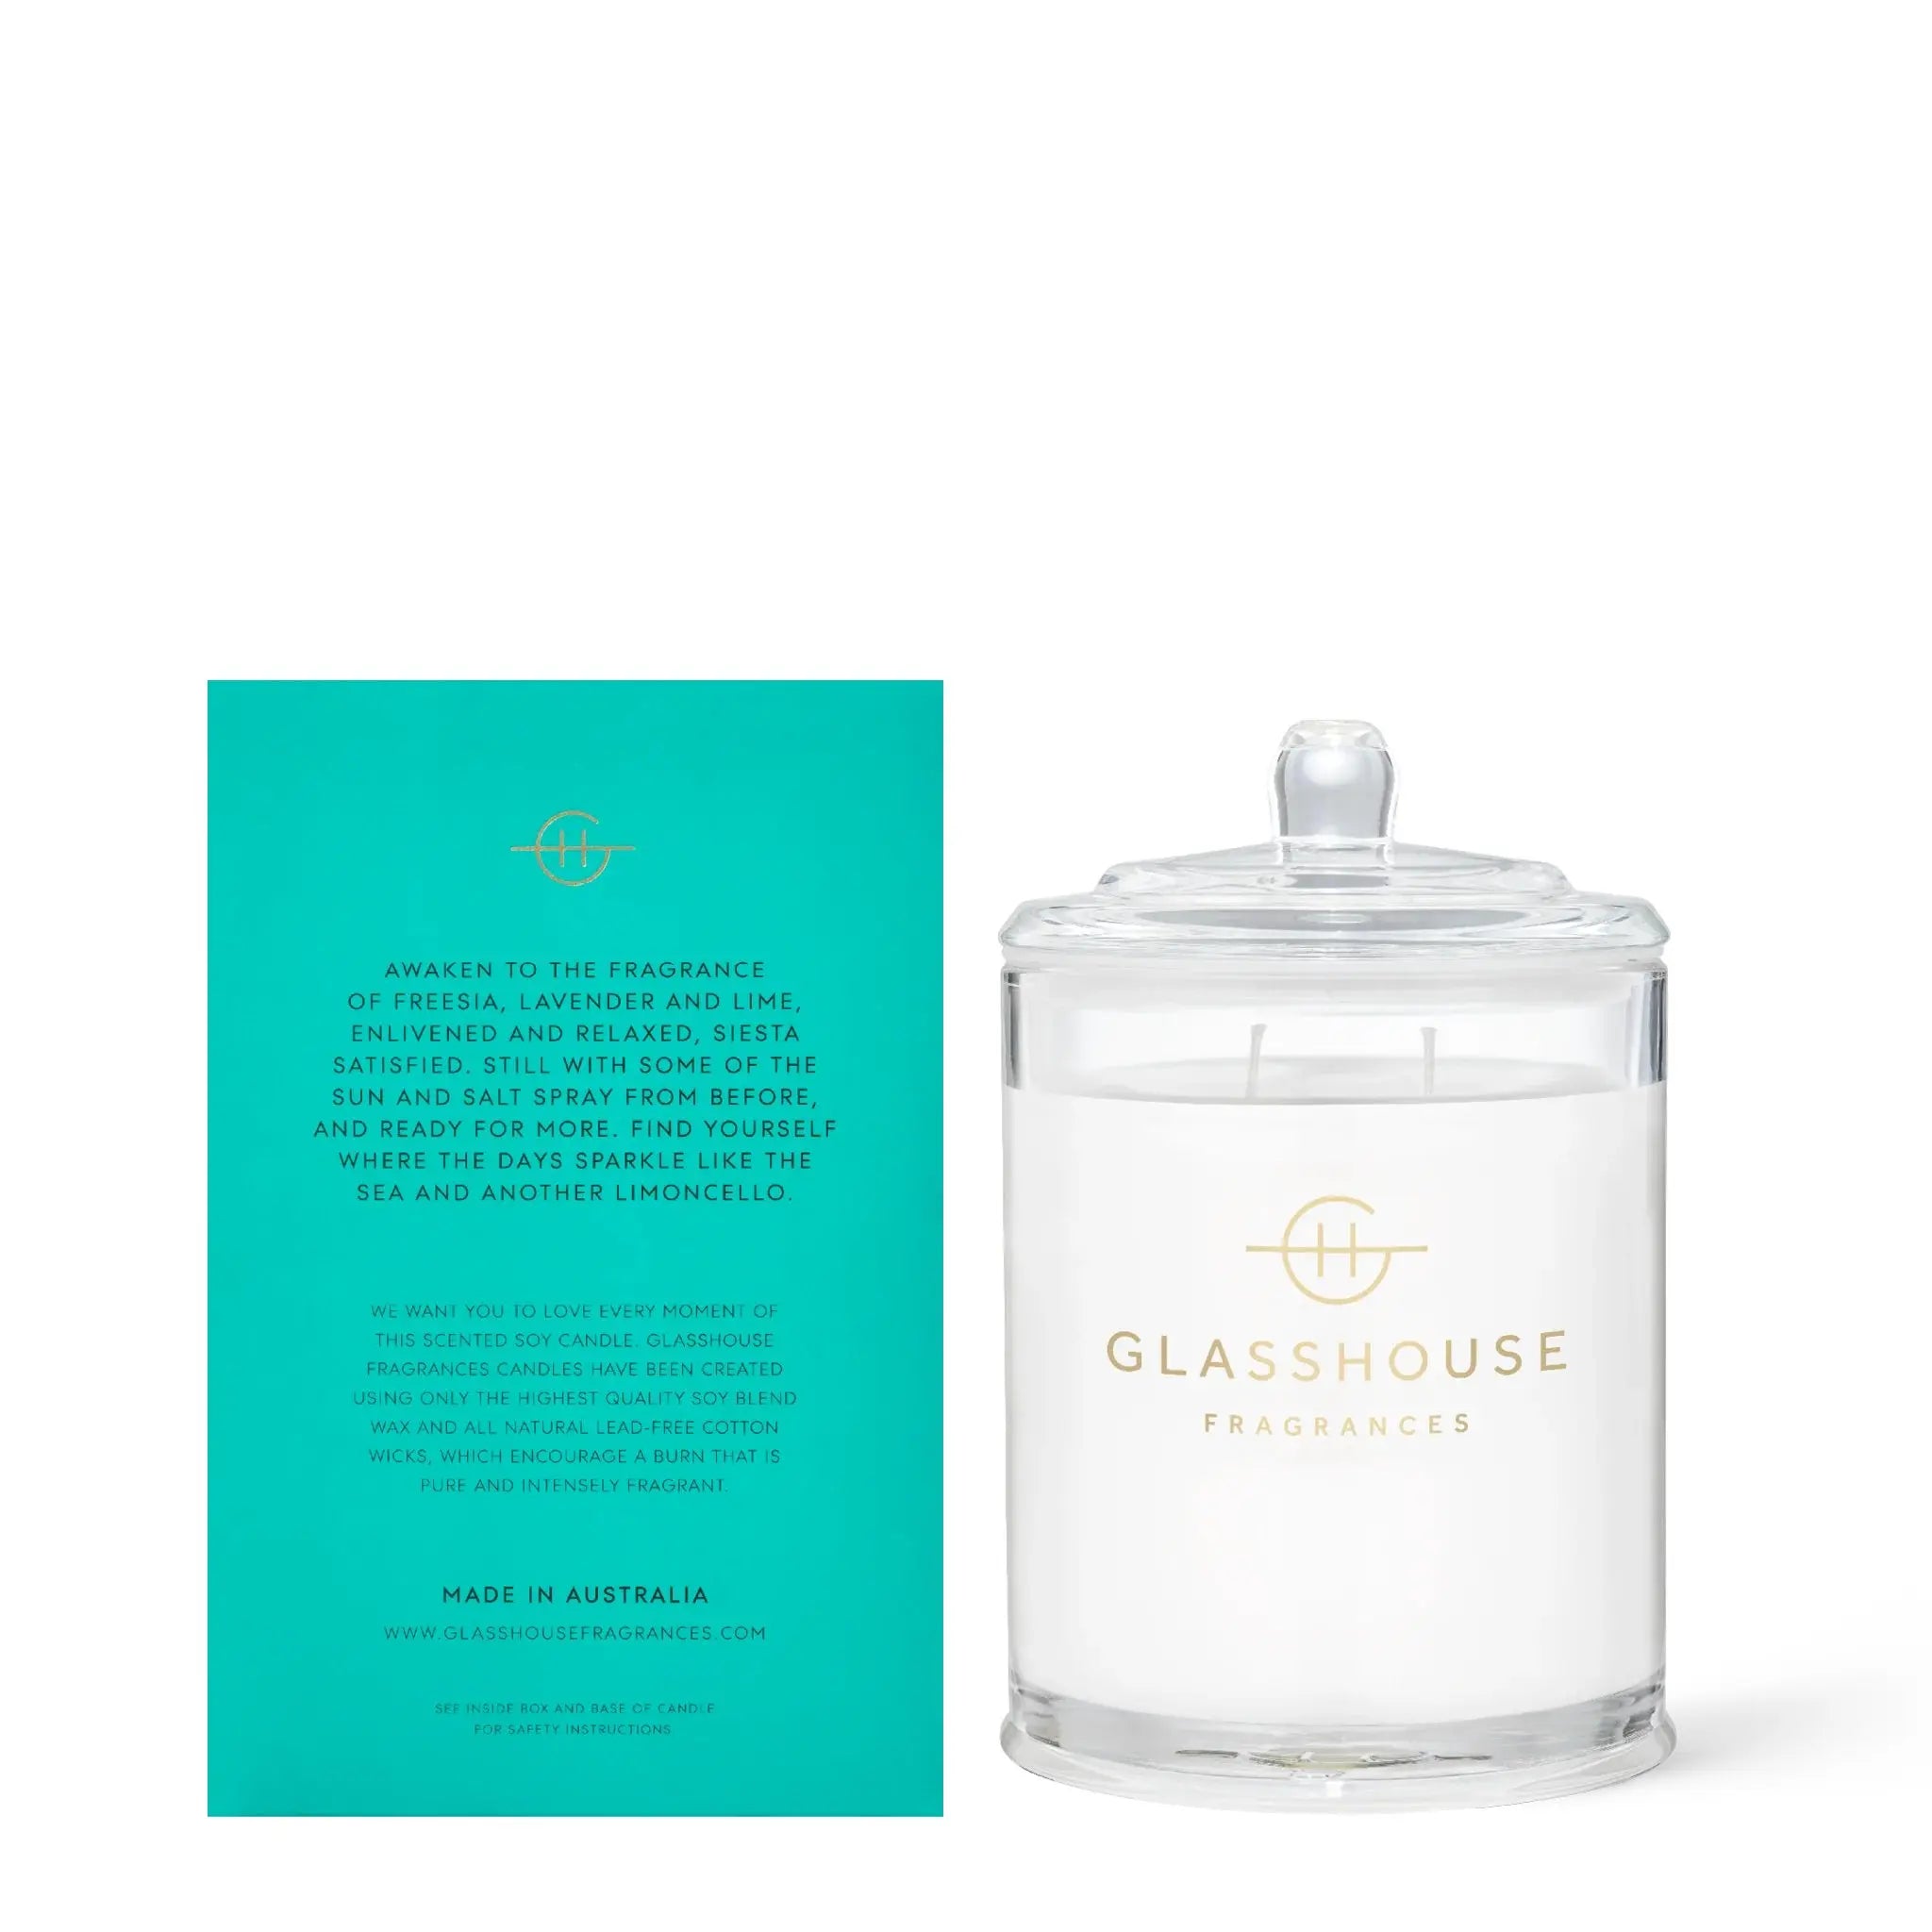 AWAKEN TO THE FRAGRANCE OF FREESIA, LAVENDER AND LIME. ENLIVEN AND RELAXED, SIESTA, SATISFIED. STILL WITH SOME OF THE SUN AND SALT SPRAY FROM BEFORE, AND READY FOR MORE. FIND YOURSELF WHERE THE DAYS SPARKLE LIKE THE SEA AND ANOTHER LIMONCELLO. We want you to love every moment of this scented soy candle. Glasshouse fragrances candles have been created using only the highest quality soy blend wax and all natural led-free cotton wicks, which encourage a burn that is pure and intensely fragrant. Made in Austral